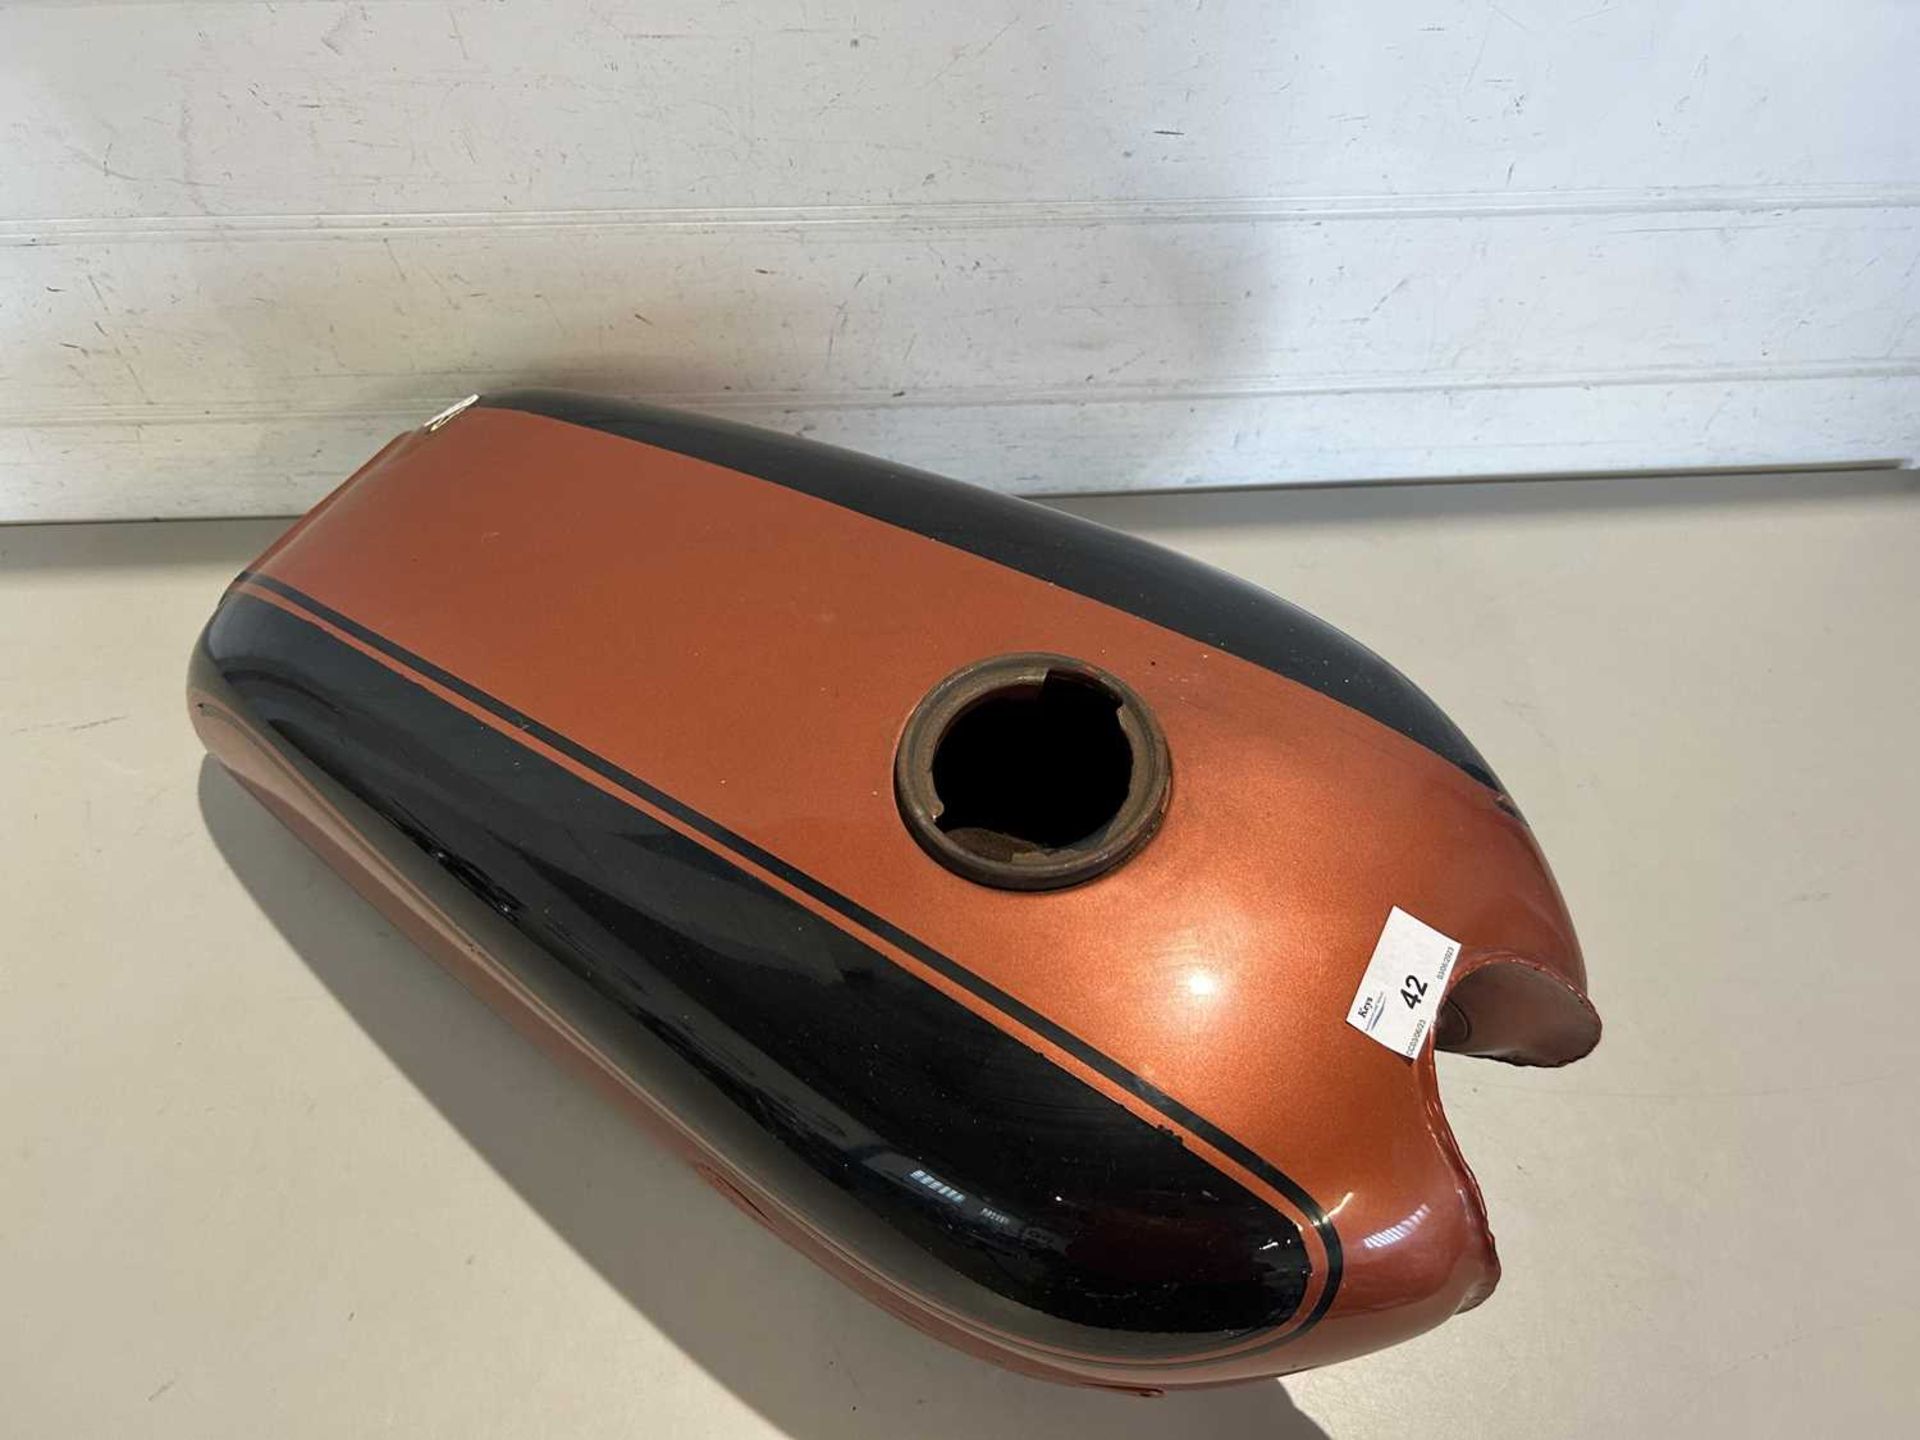 Fuel tank for Yamaha R5 motorcycle, orange and black - Image 2 of 3